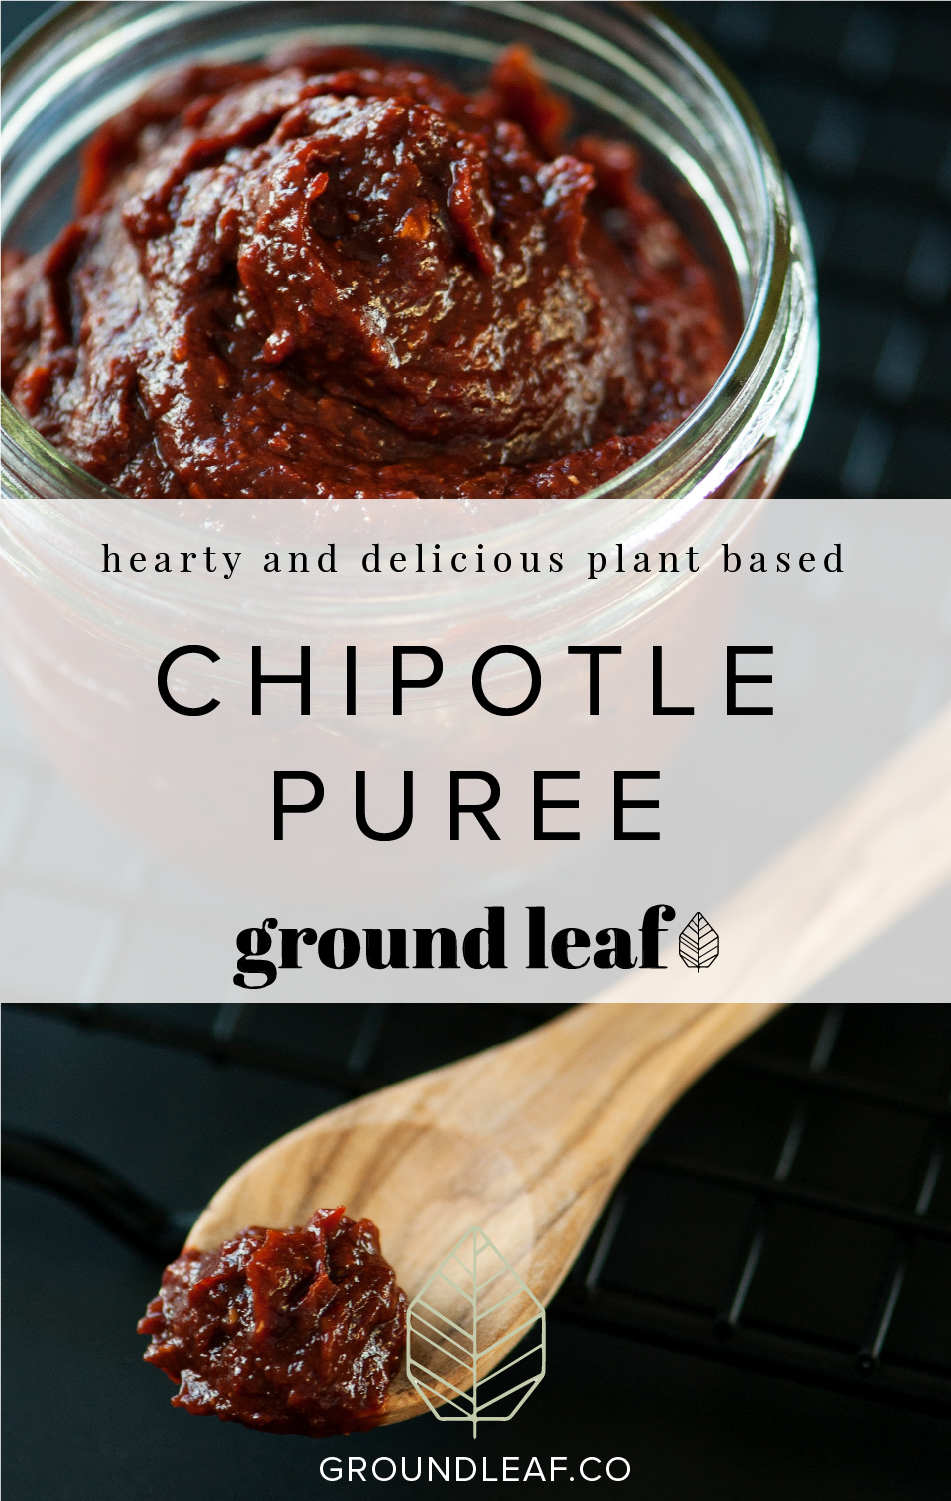 Spice up your soups and dishes! Learn how to make chipotle puree! | Groundleaf.co